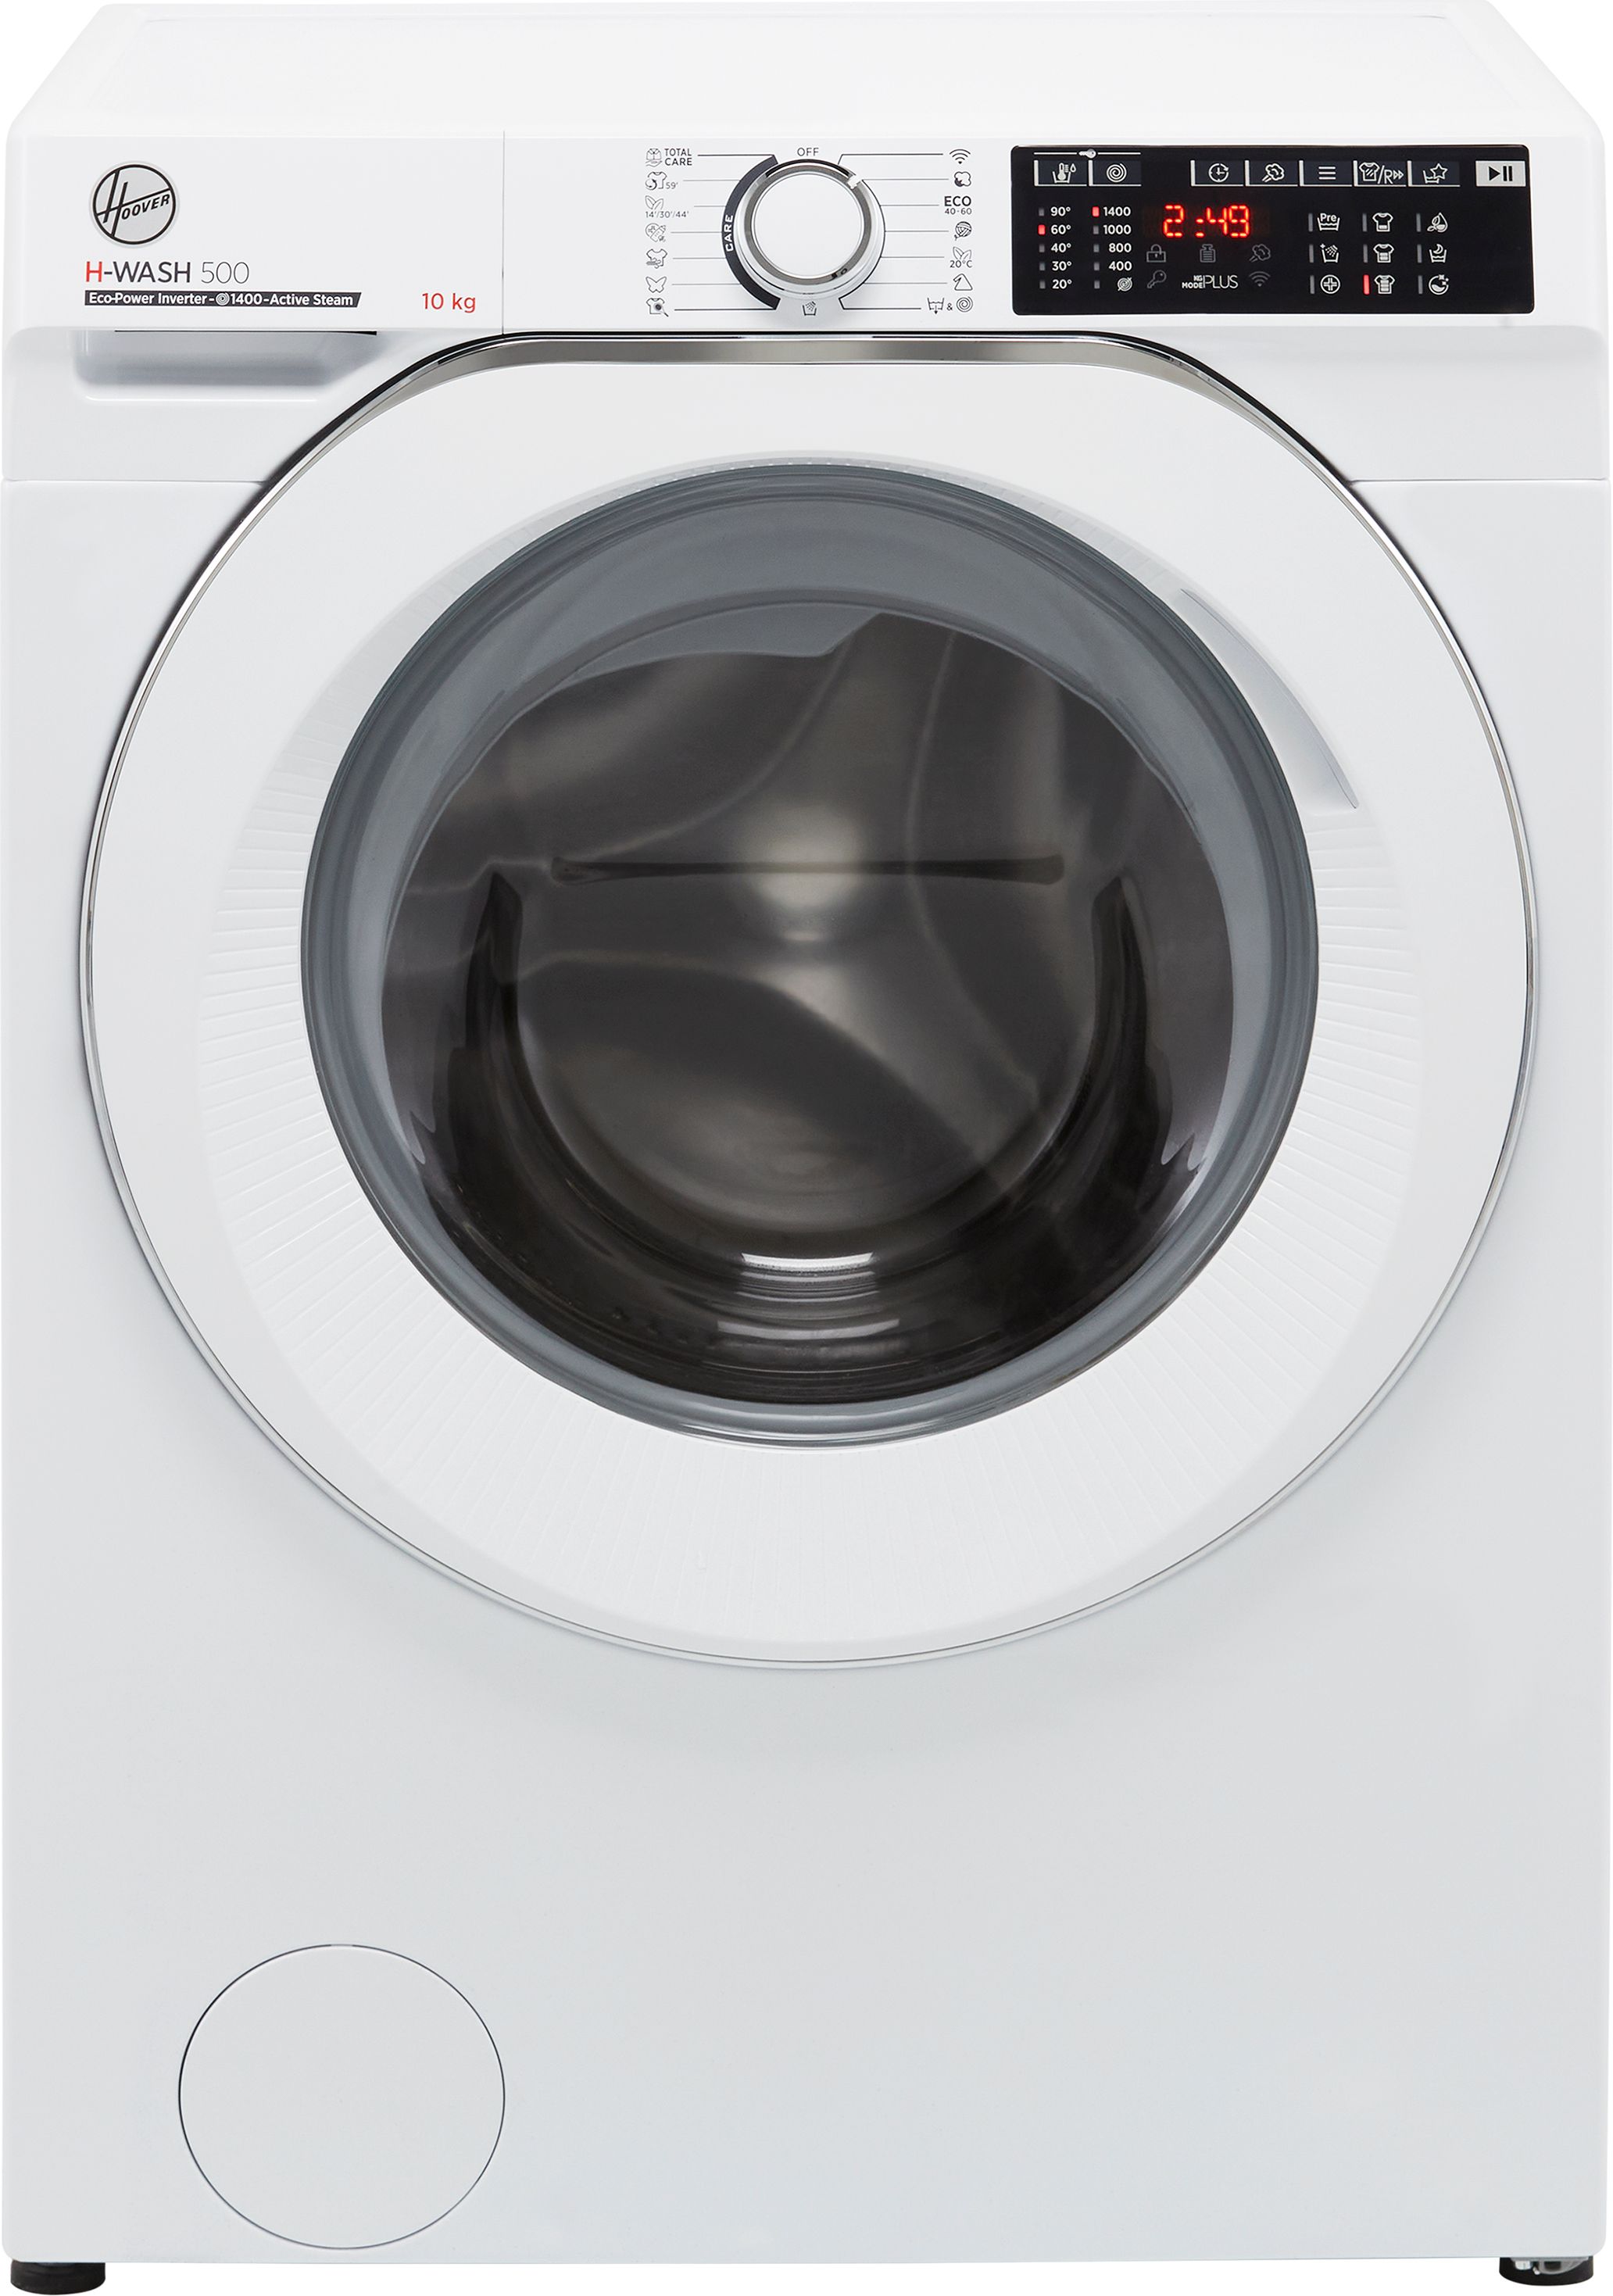 Hoover H-WASH 500 HW410AMC1 10kg Washing Machine with 1400 rpm - White - A Rated White